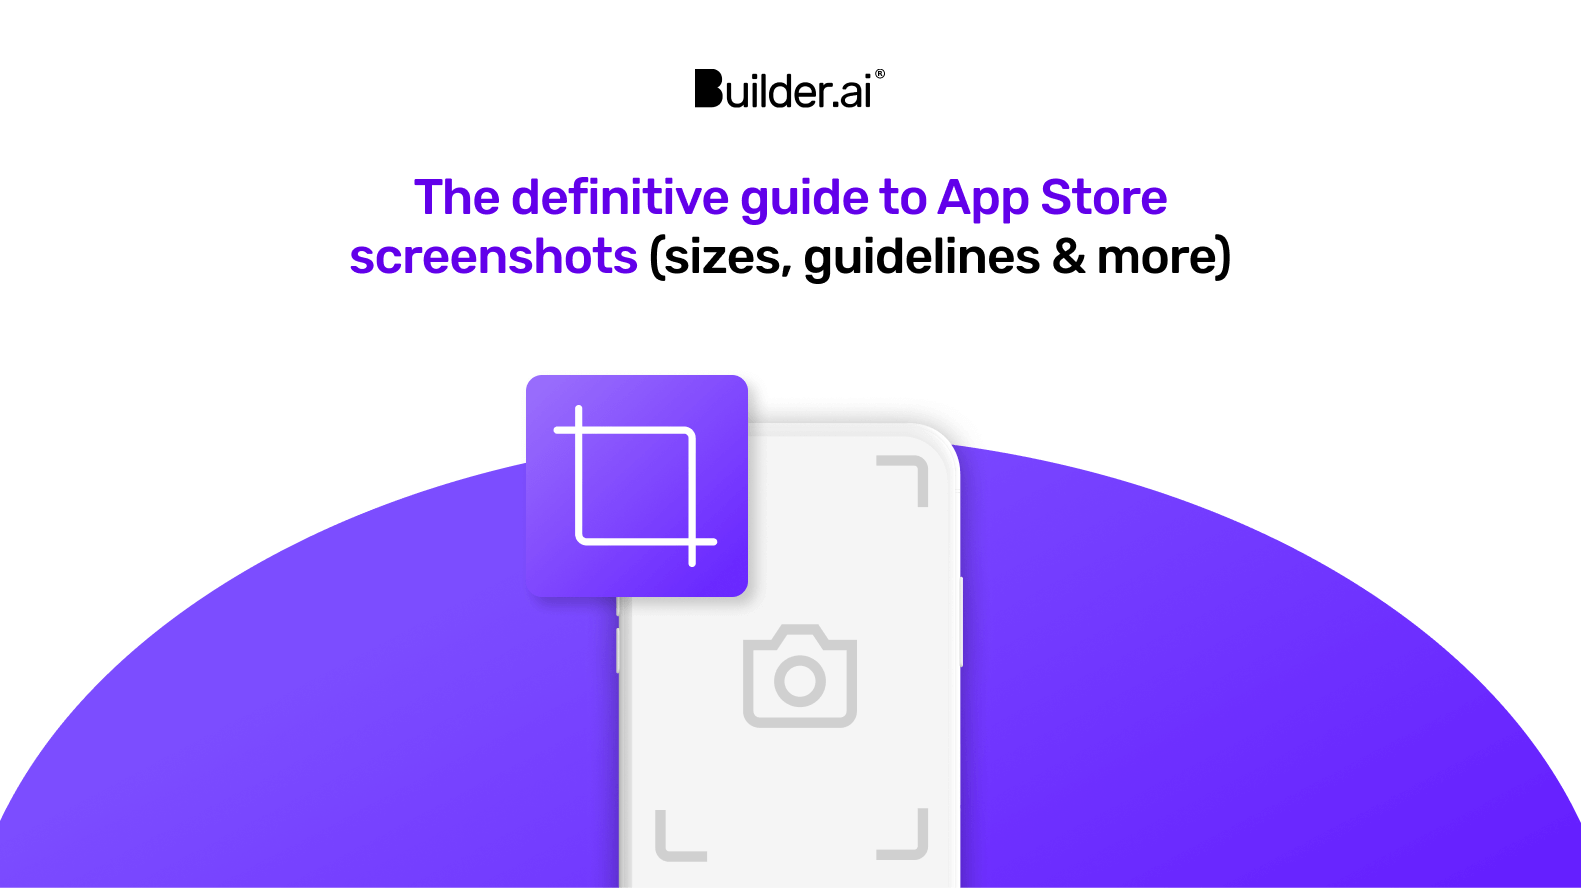 The definitive guide to App Store screenshots (sizes, guidelines & more)